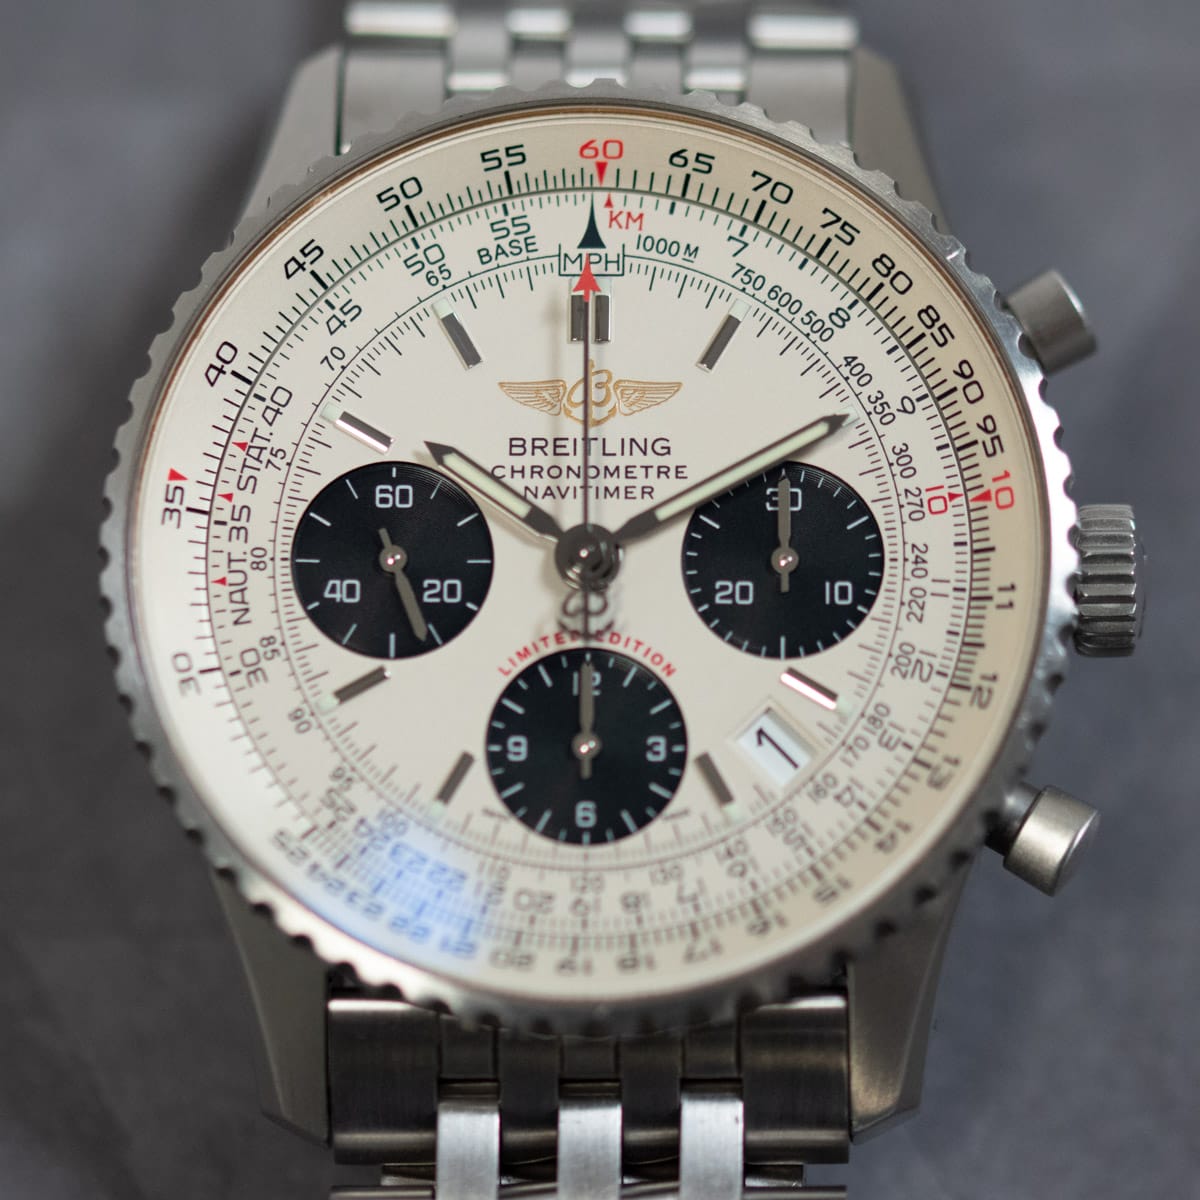 Extra Shot of Navitimer 09 Japan Limited Edition